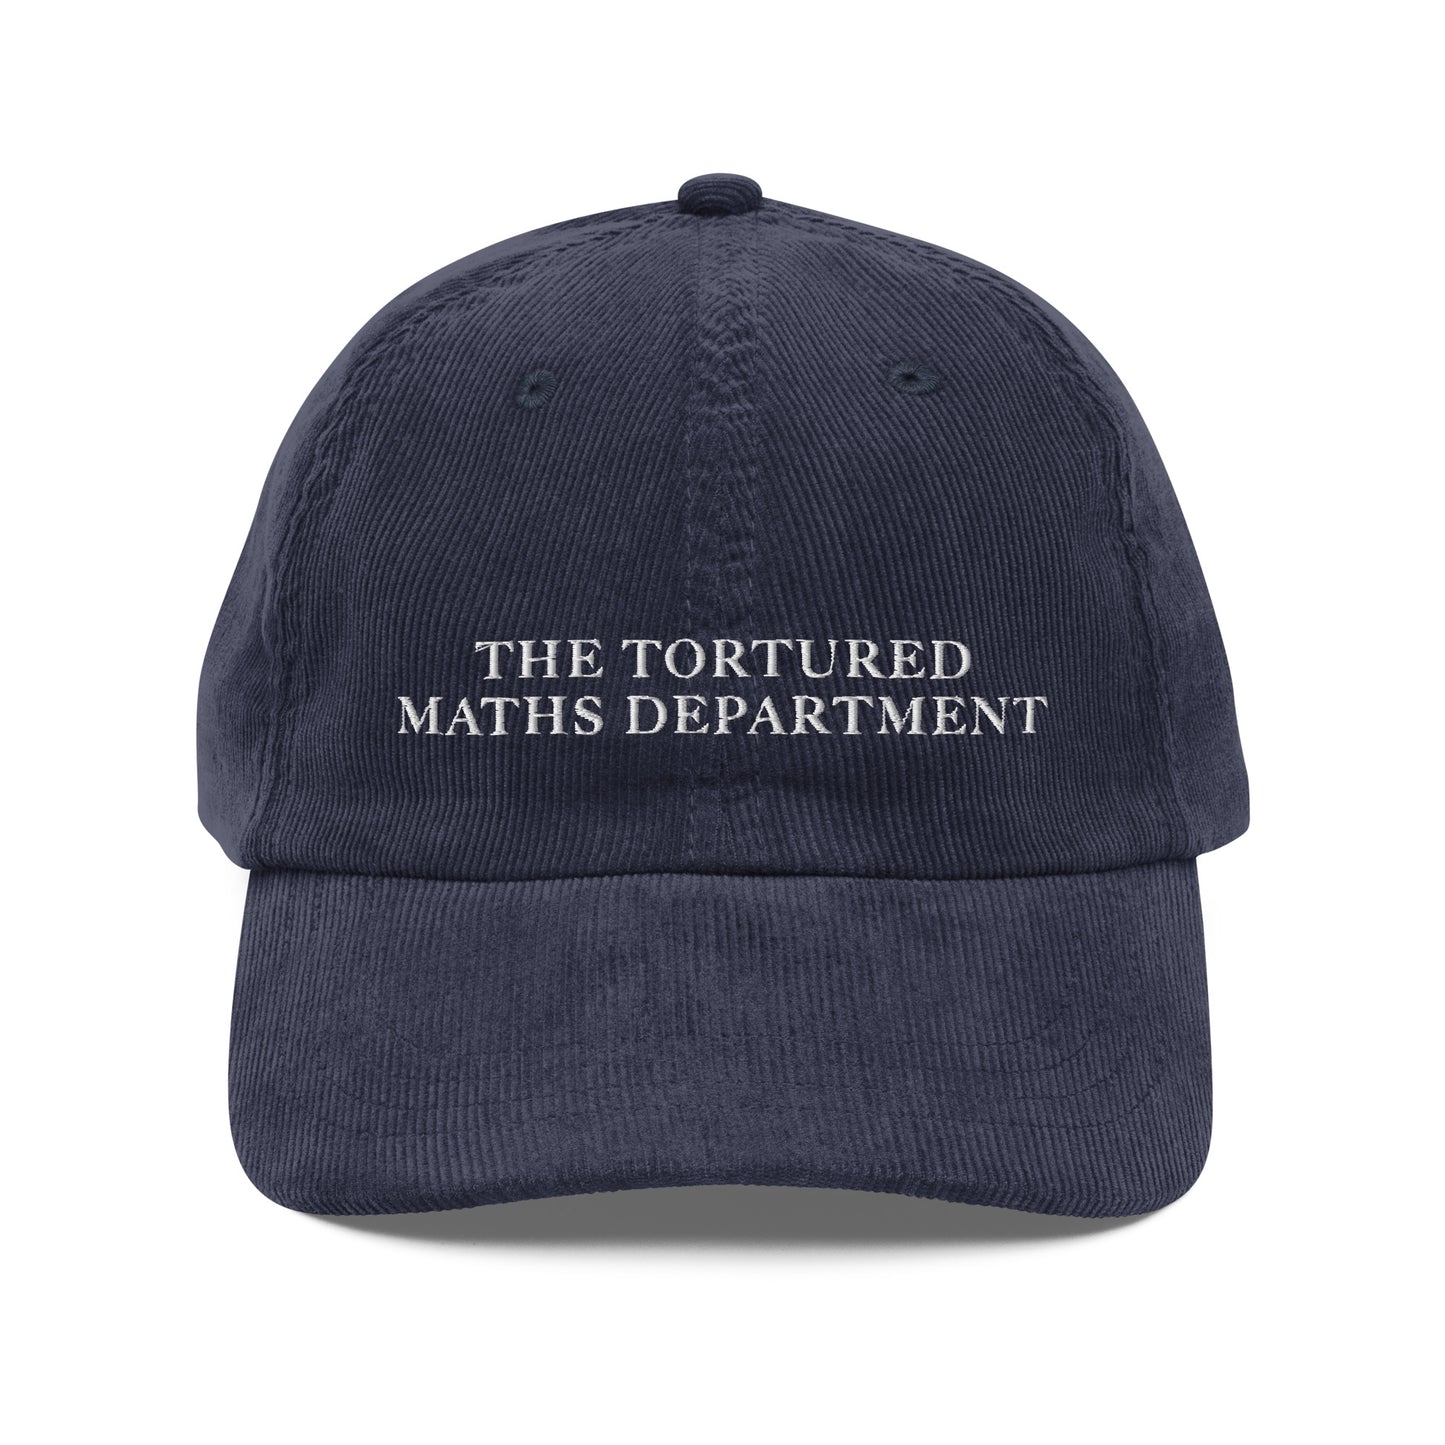 The Tortured Maths Department Hat